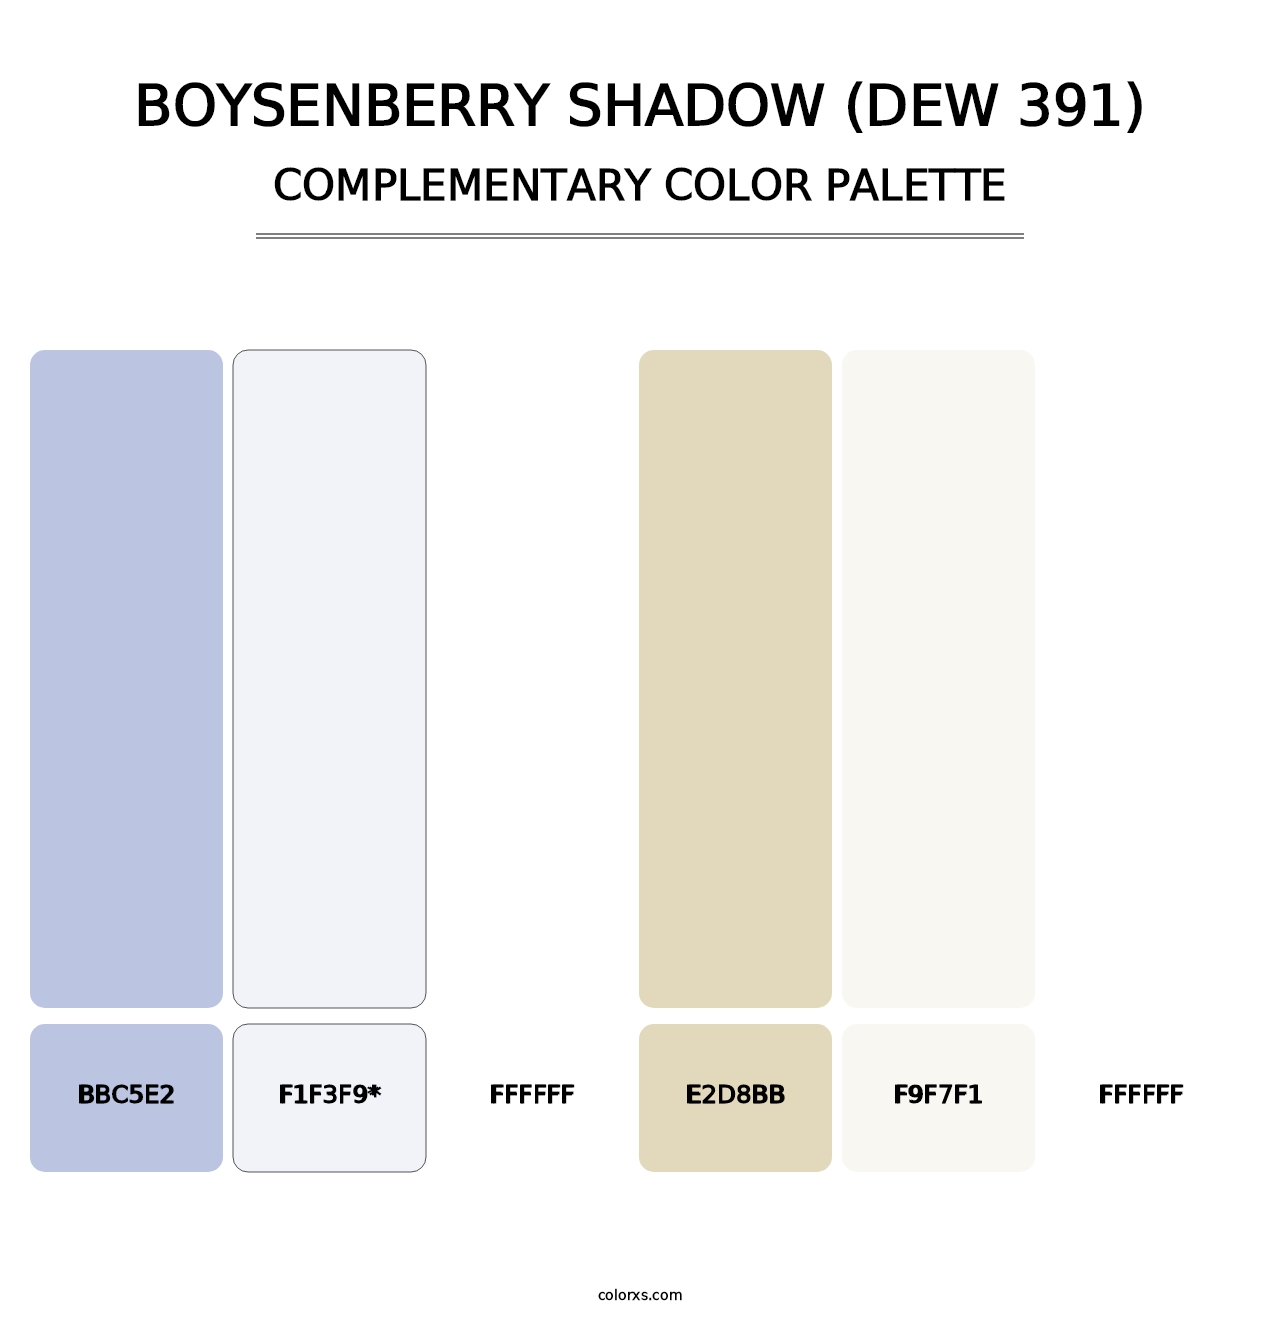 Boysenberry Shadow (DEW 391) - Complementary Color Palette